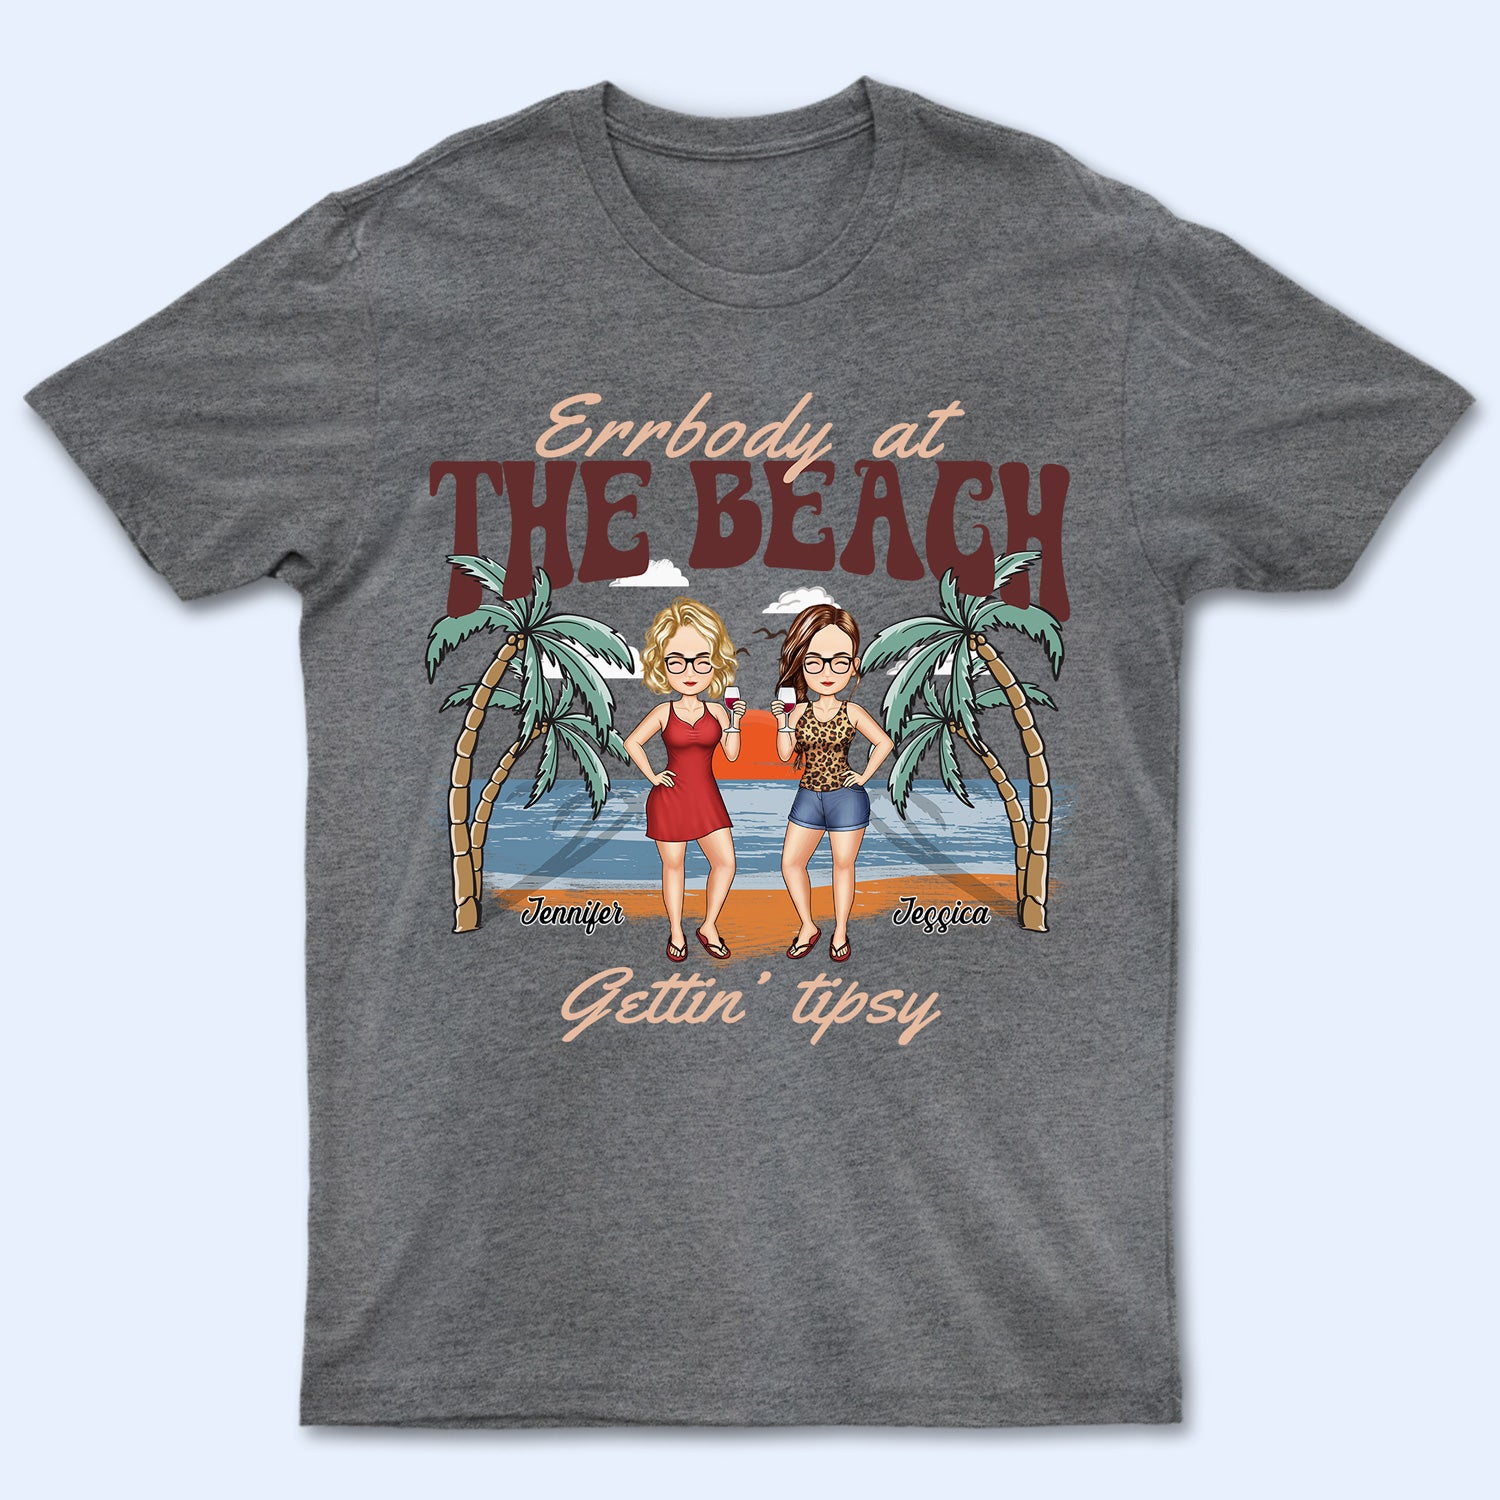 Errbody At The Beach Getting Tipsy - Birthday, Anniversary, Travel, Vacation Gift For Bestie, BFF, Sisters - Personalized T Shirt